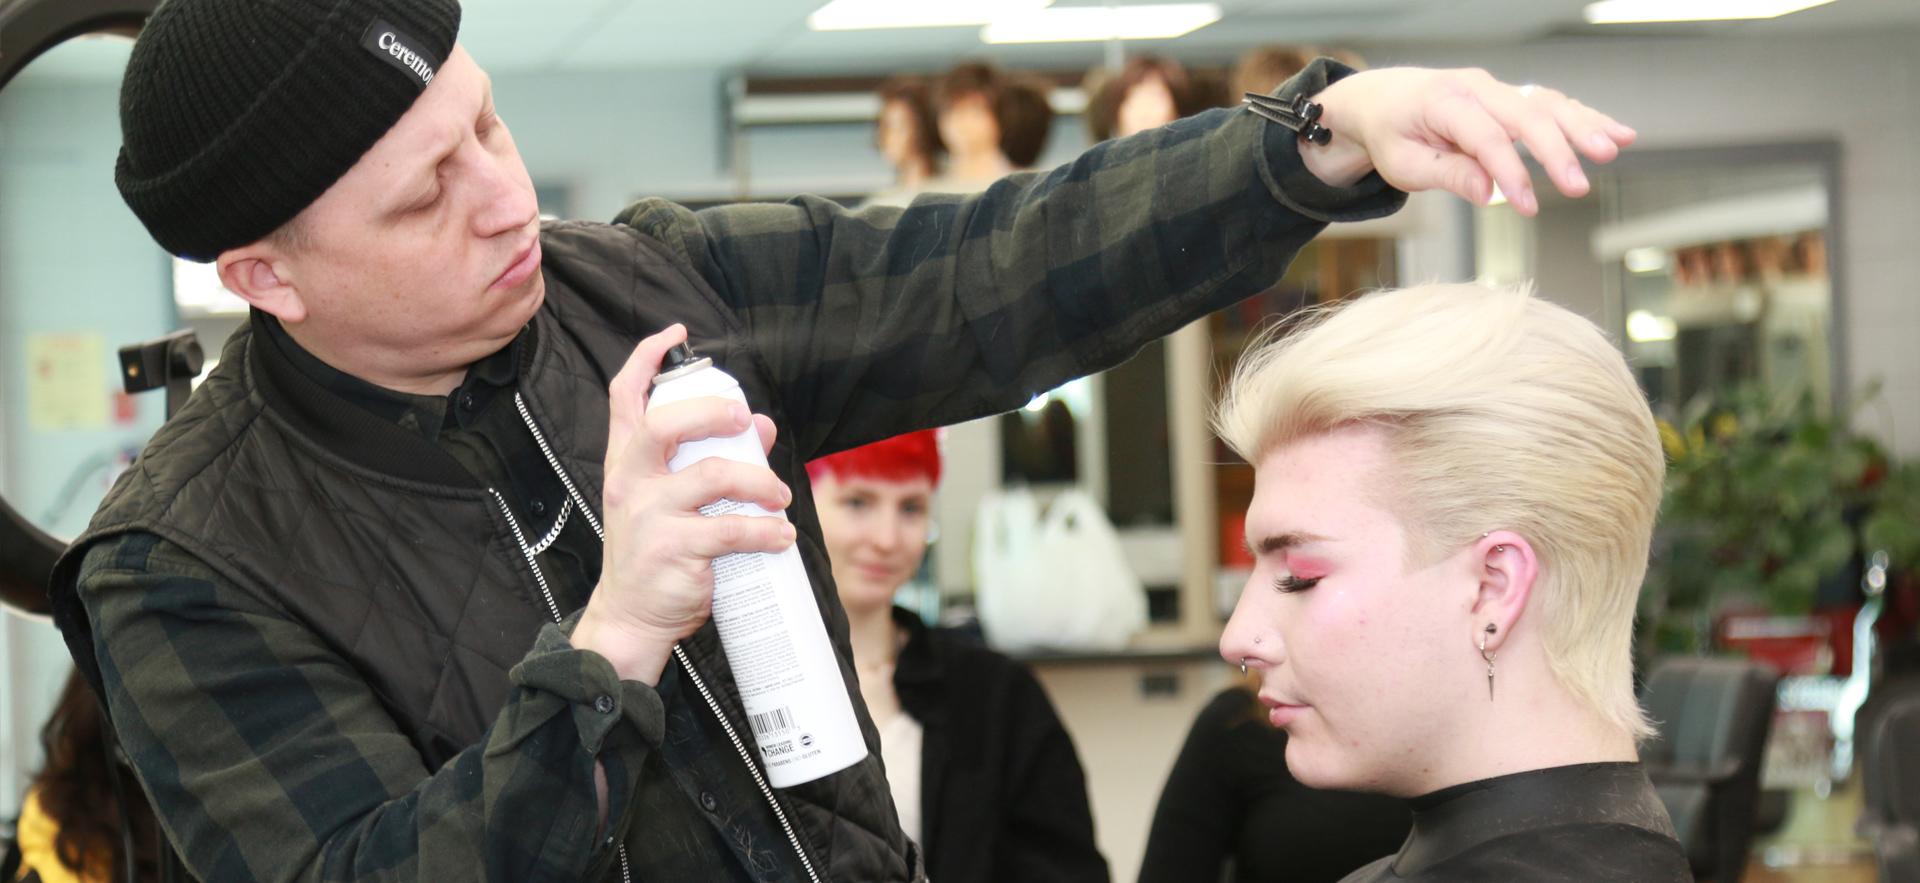 Peter Gosling of Glassbox Education doing a student's hair to teach short hairstyle techniques in his workshop